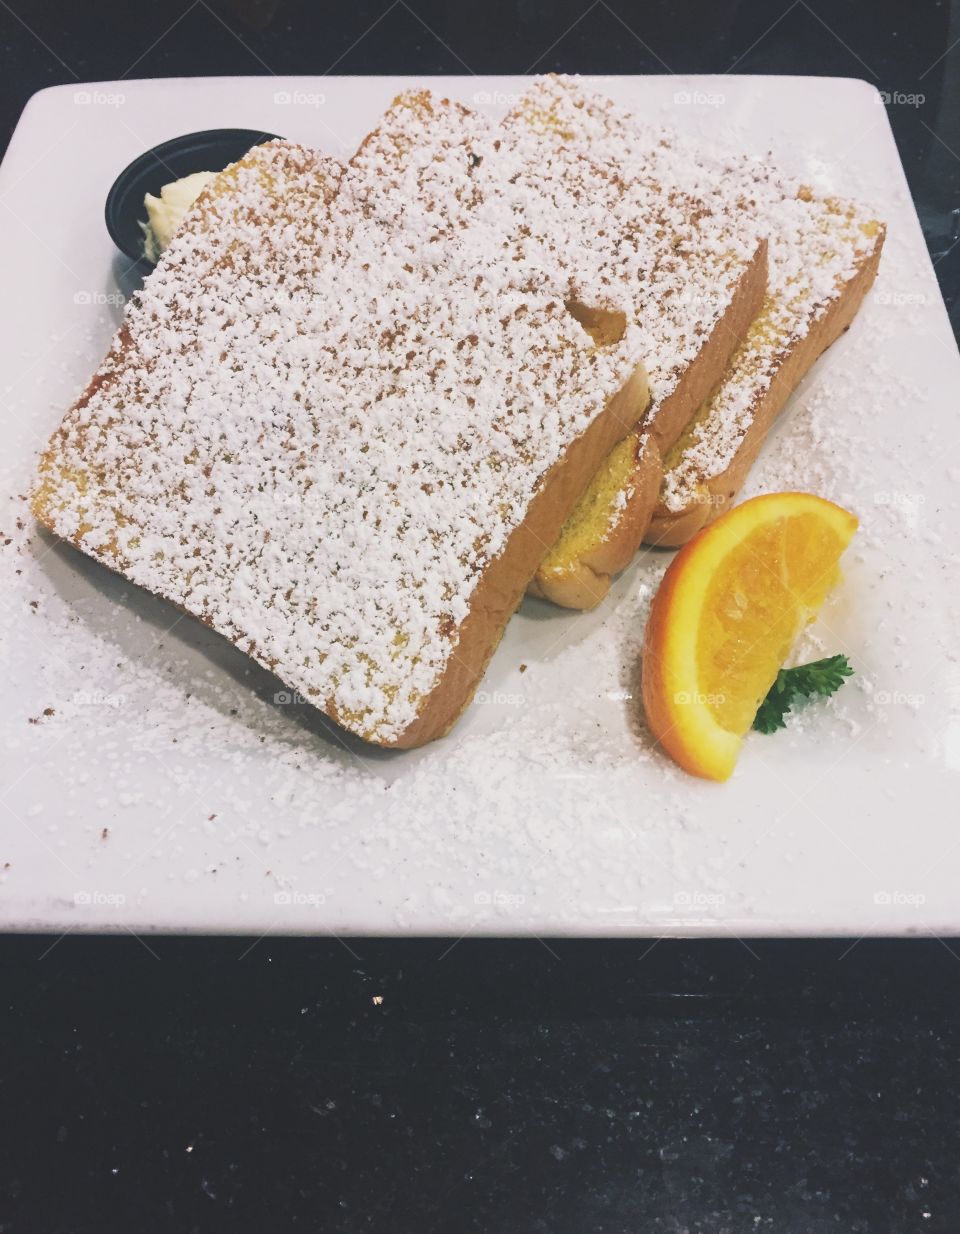 A savory, sweet, and mouthwatering breakfast complete with a sliced lemon and powdered sugar. 